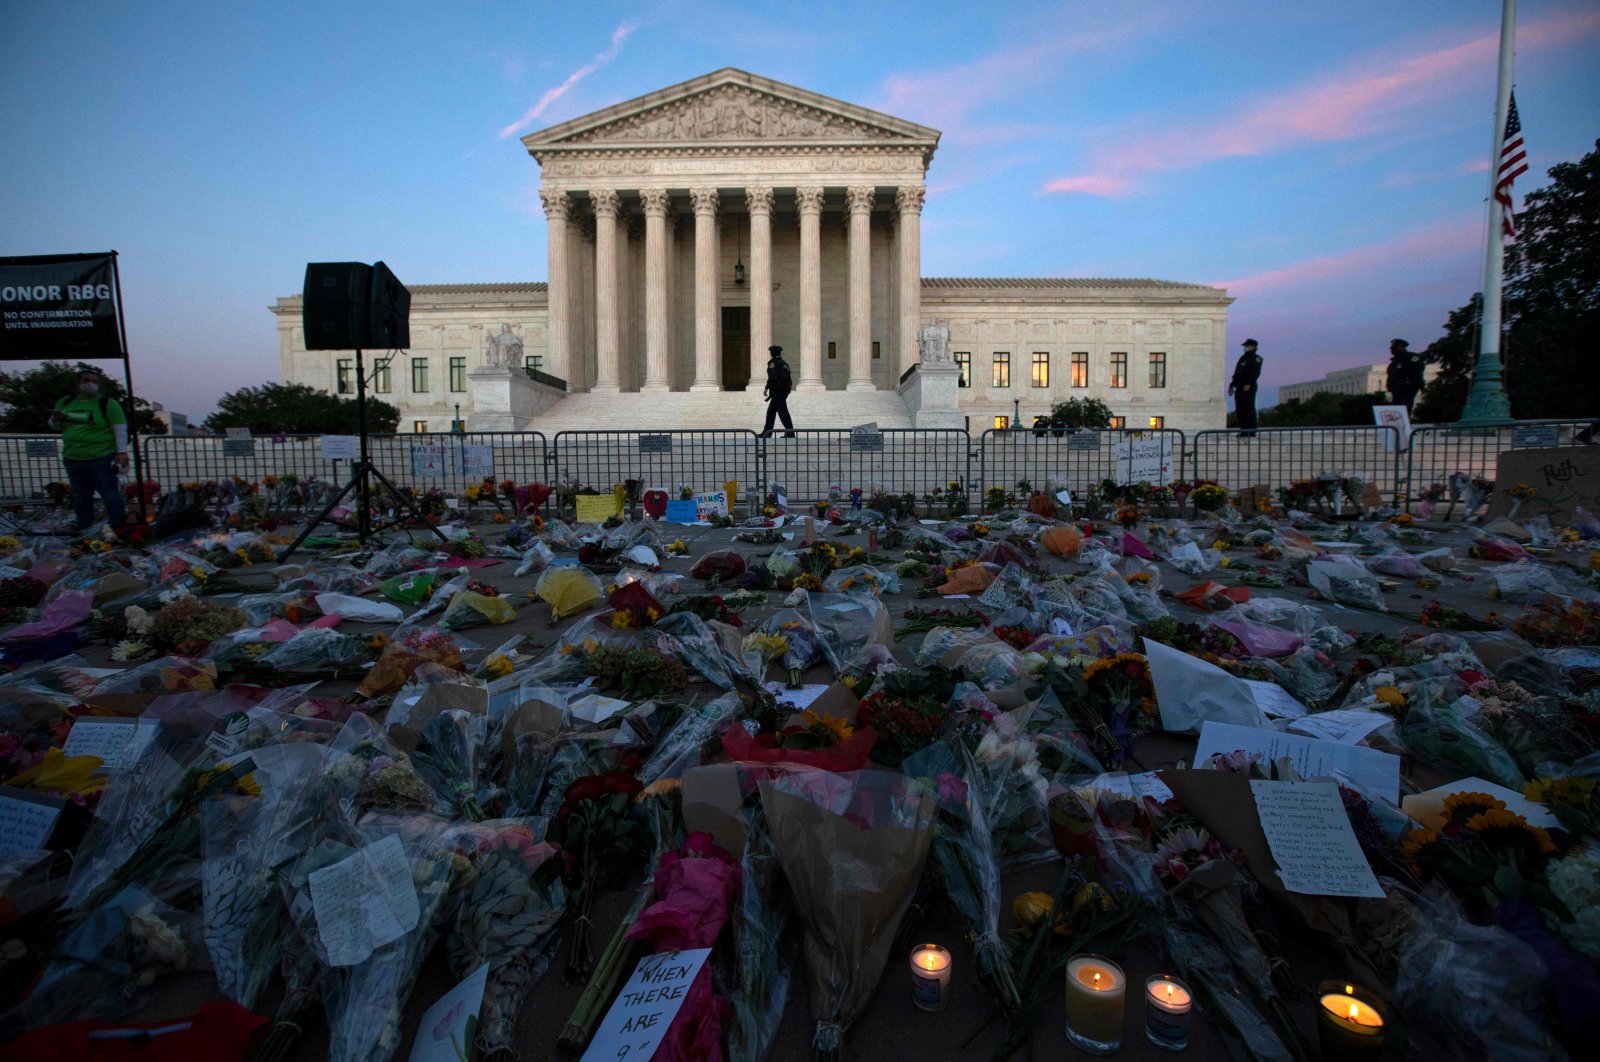 Flowers, candles and signs are pictured at a makeshift memorial outside of the U.S. Supreme Court as people pay their respects to Ruth Bader Ginsburg, Washington, D.C., Sept. 19, 2020. (AFP Photo)